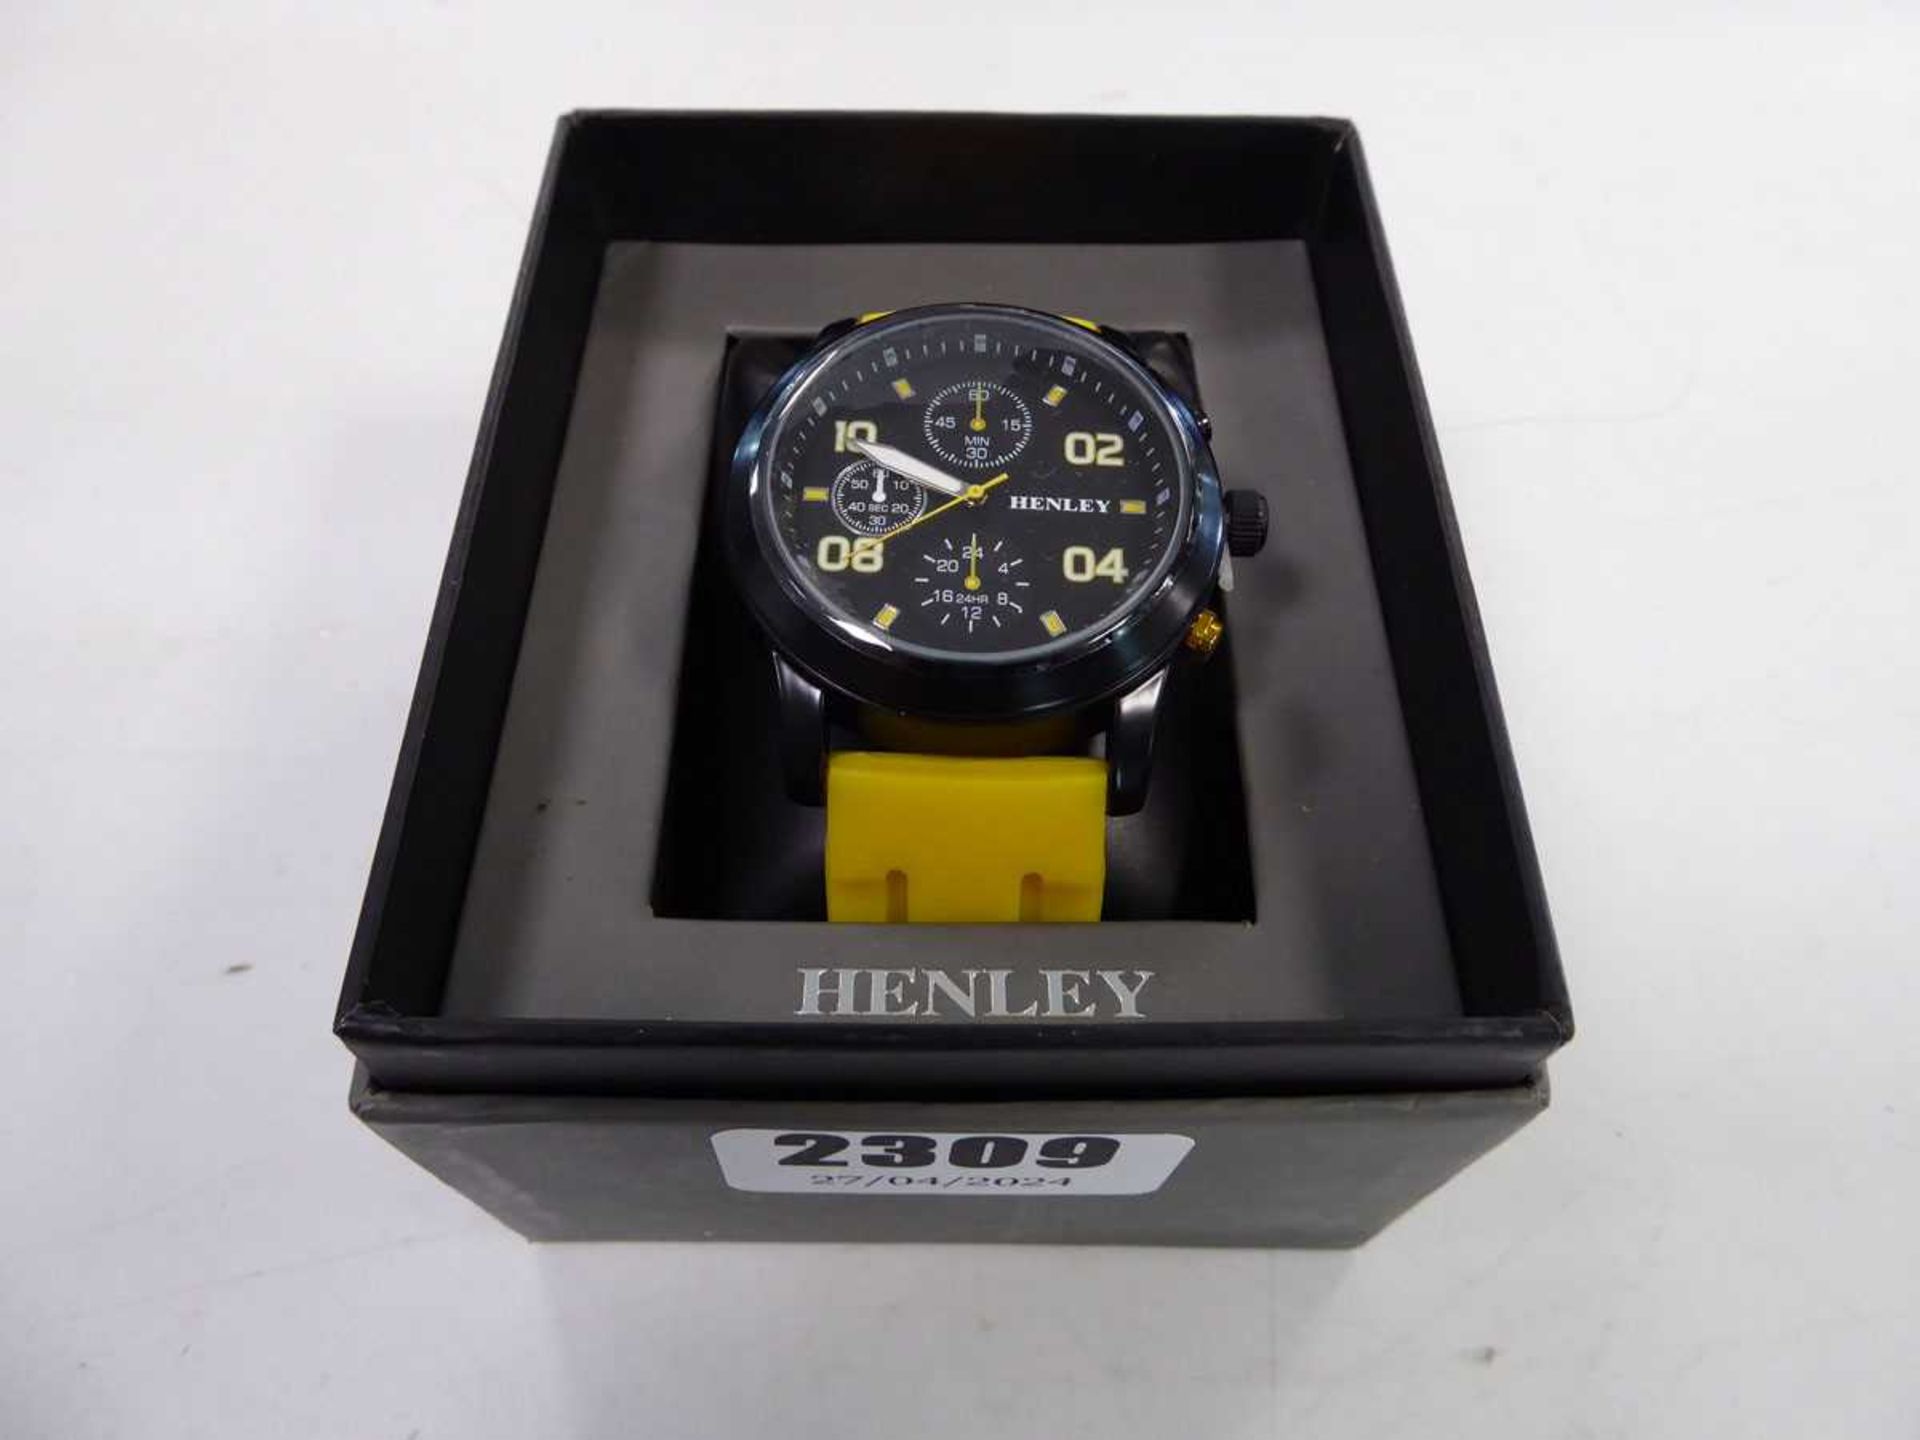 Henley men's sub-dial wristwatch with black face and yellow strap